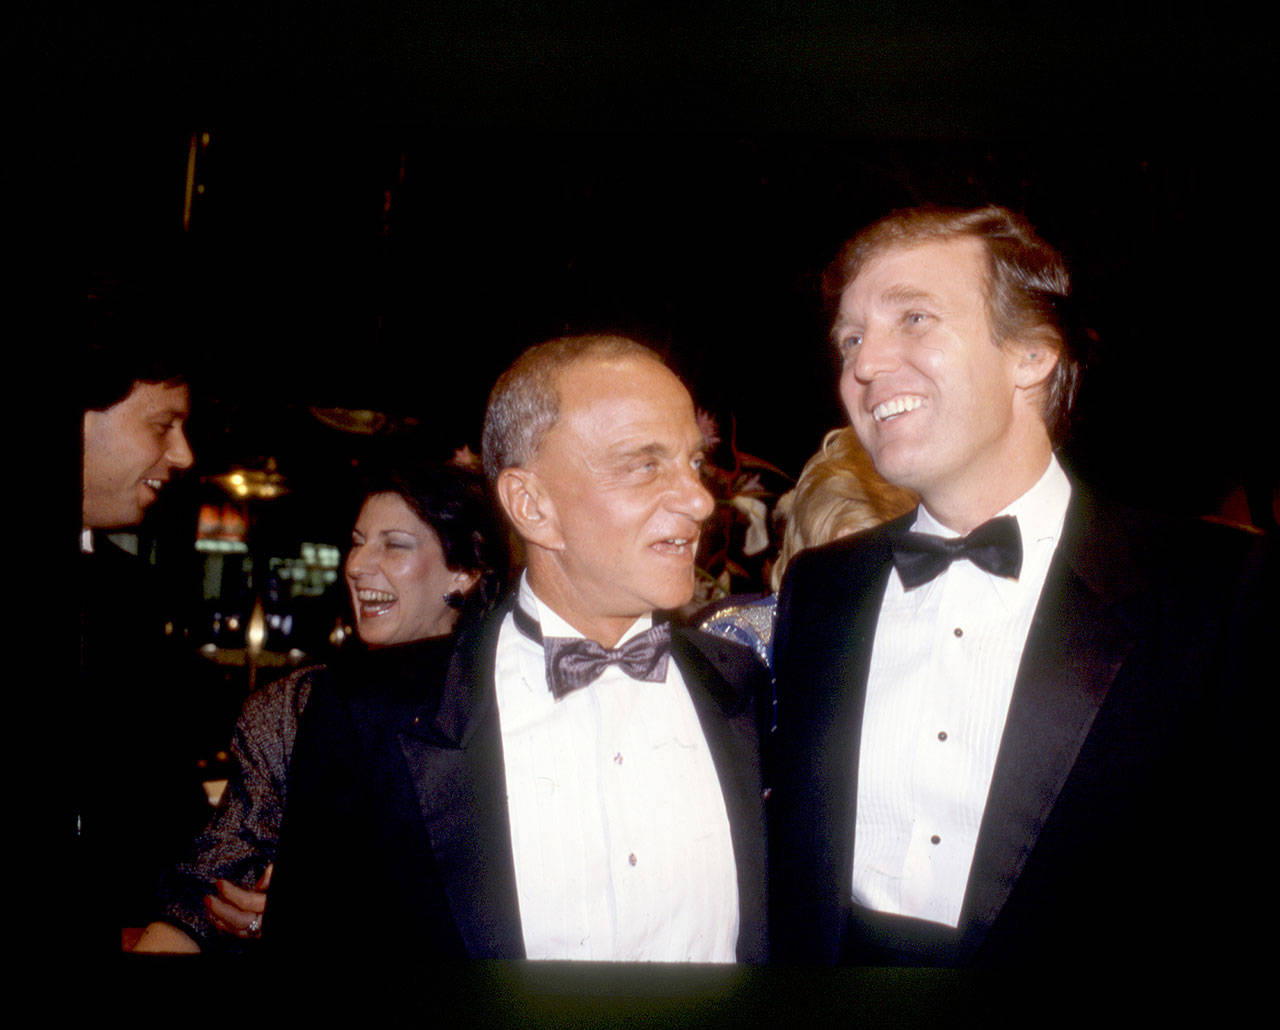 Roy Cohn, shown here with a young Donald Trump, is the subject of the documentary “Where’s My Roy Cohn?” Cohn, a notorious hatchet man and political fixer, was Trump’s mentor in the 1970s and ’80s. (Sony Pictures Classics)